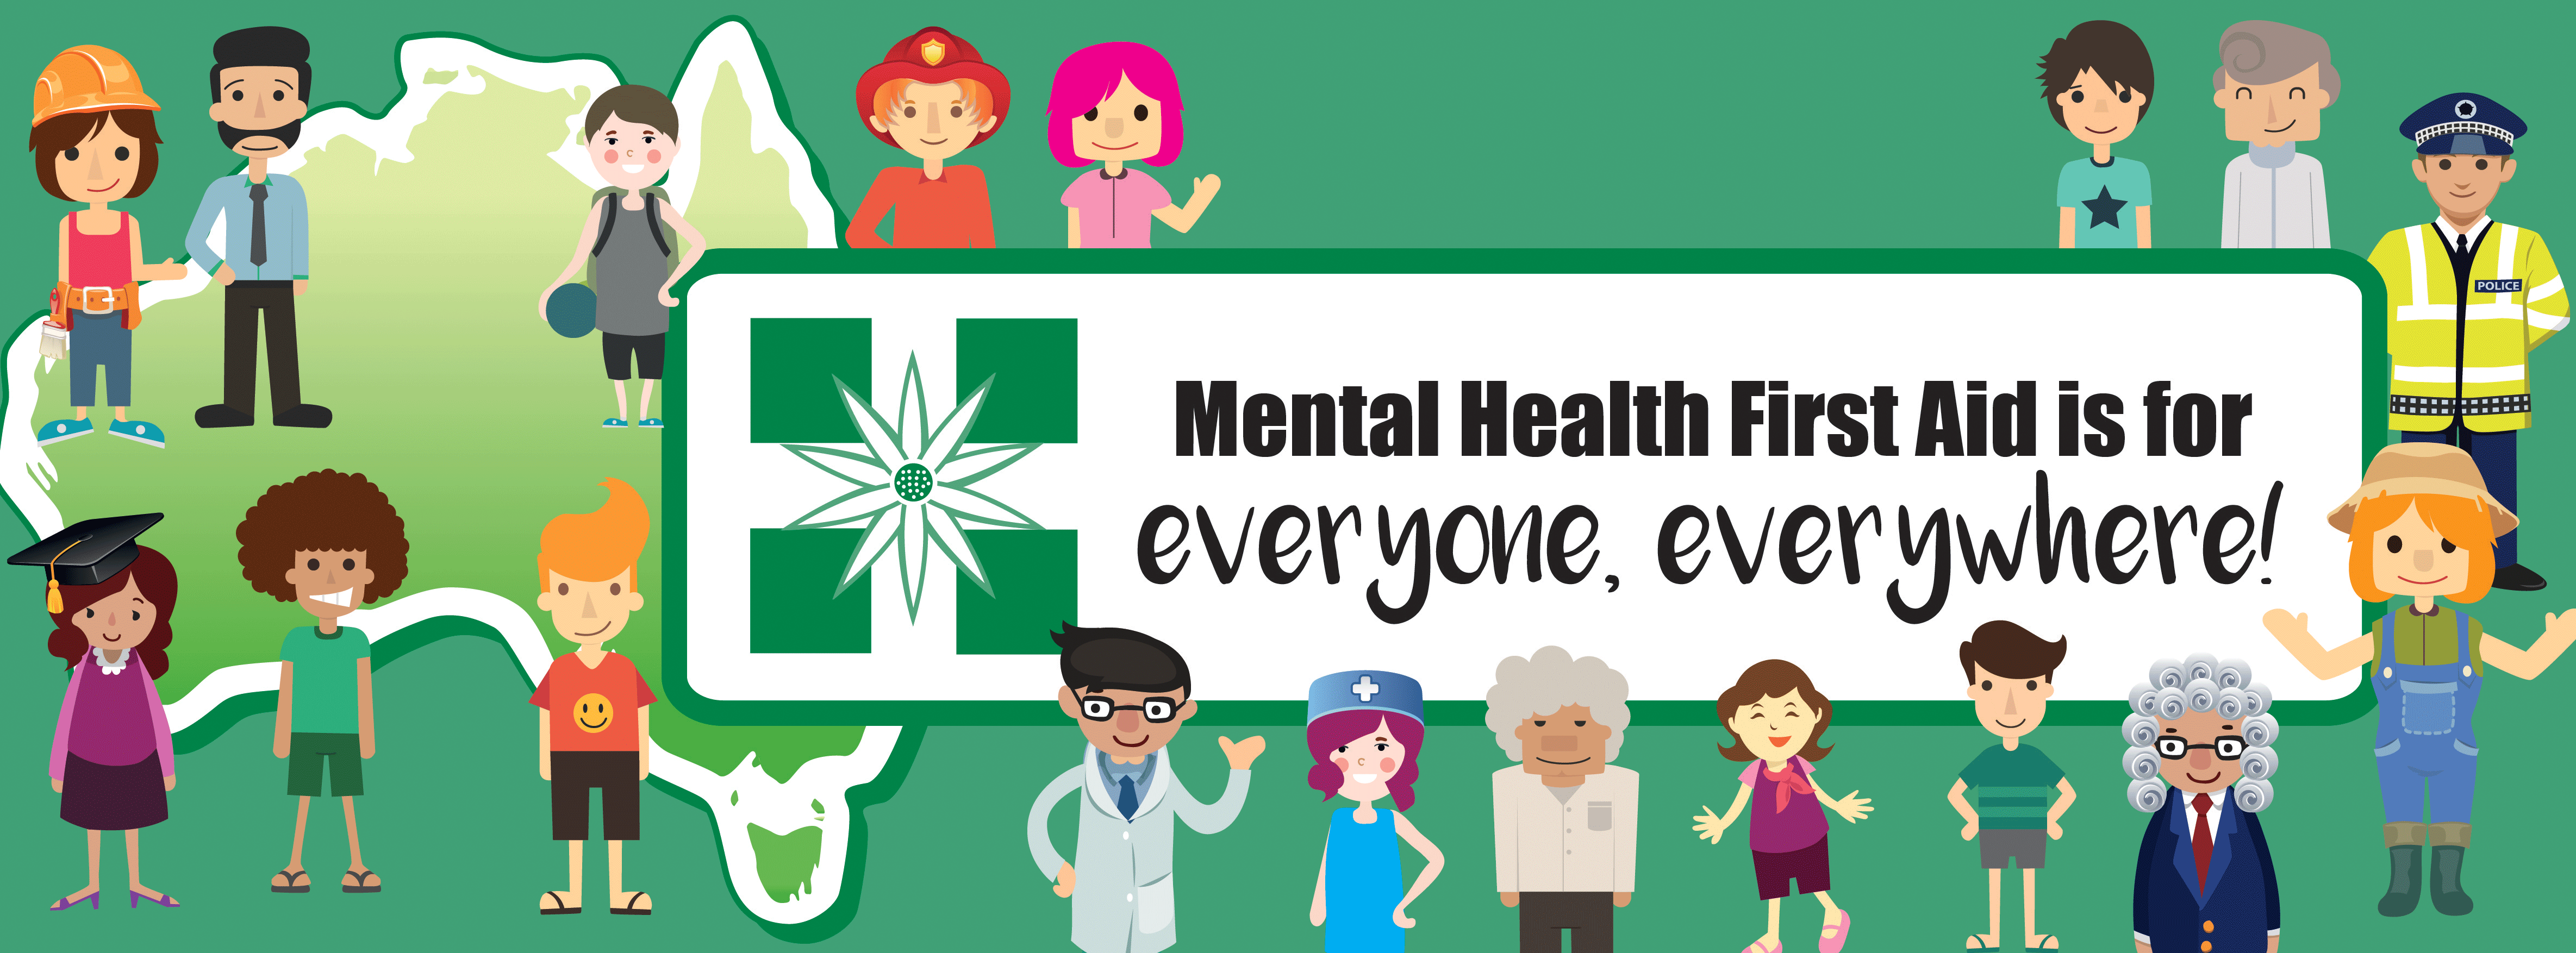 Mental Health First Aid Is For Everyone, Everywhere World First Aid Day